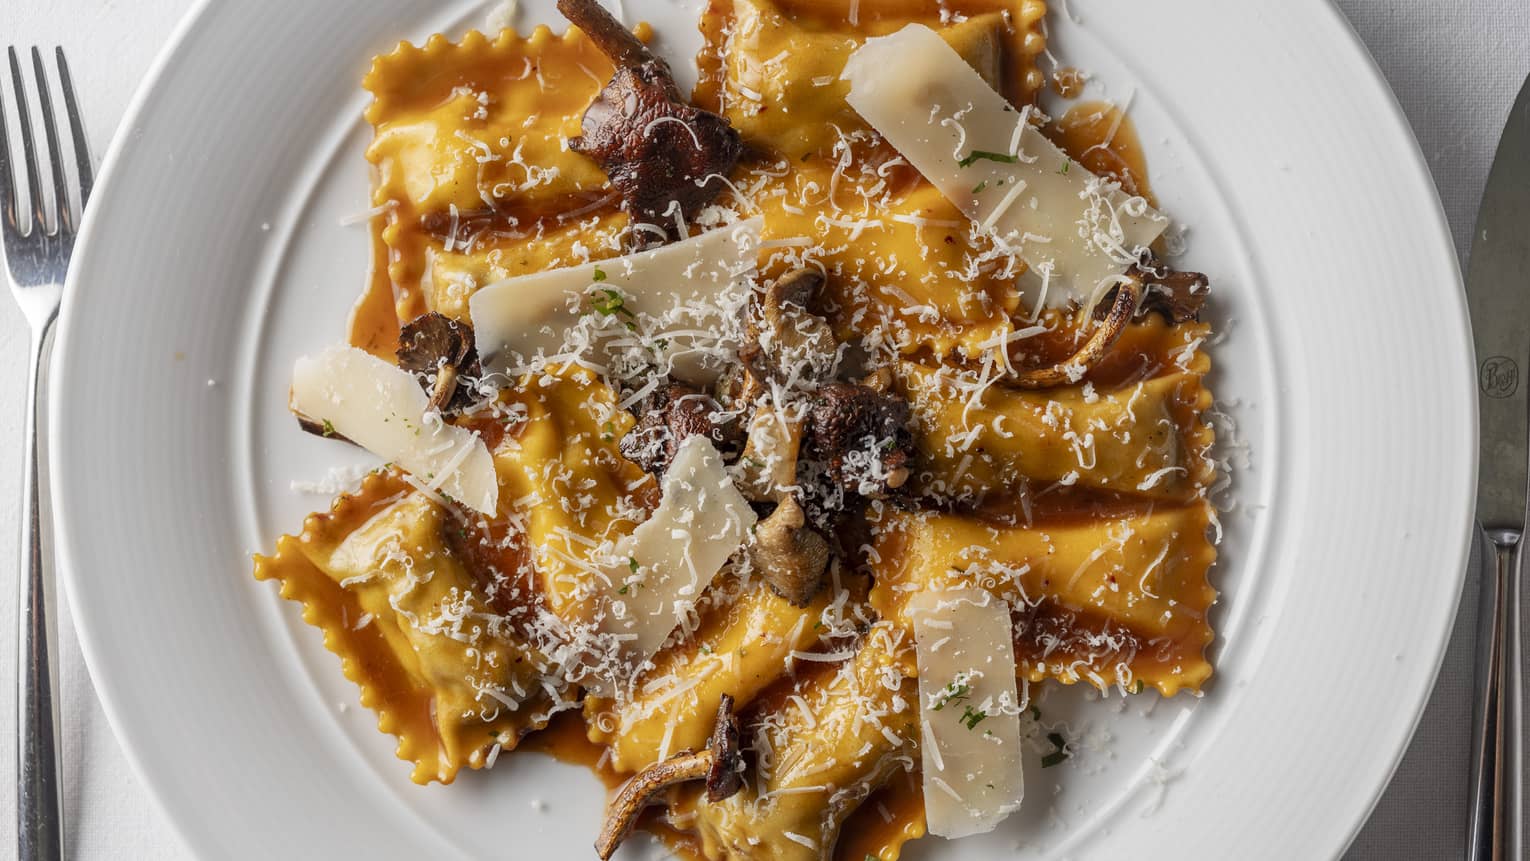 Ravioli doppi served on a white, round dish and topped with Parmigiano Reggiano and mushrooms